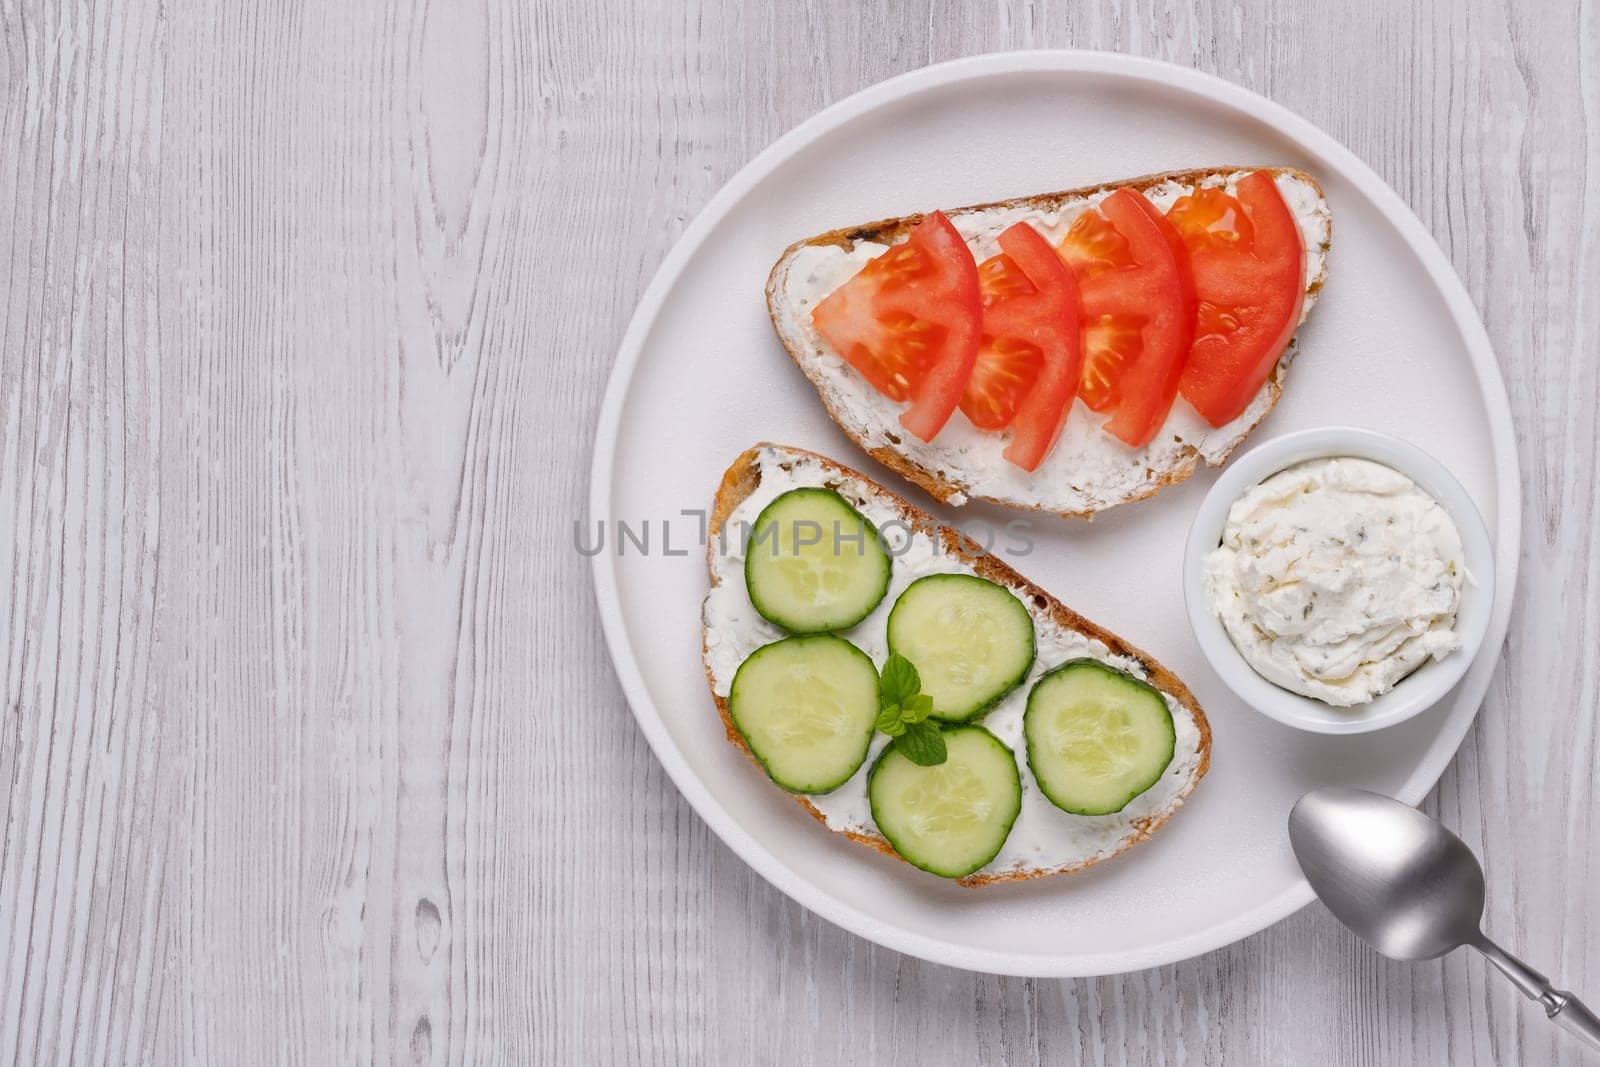 Healthy sandwiches with white cottage cheese, cucumber and tomato, with copy space for text.